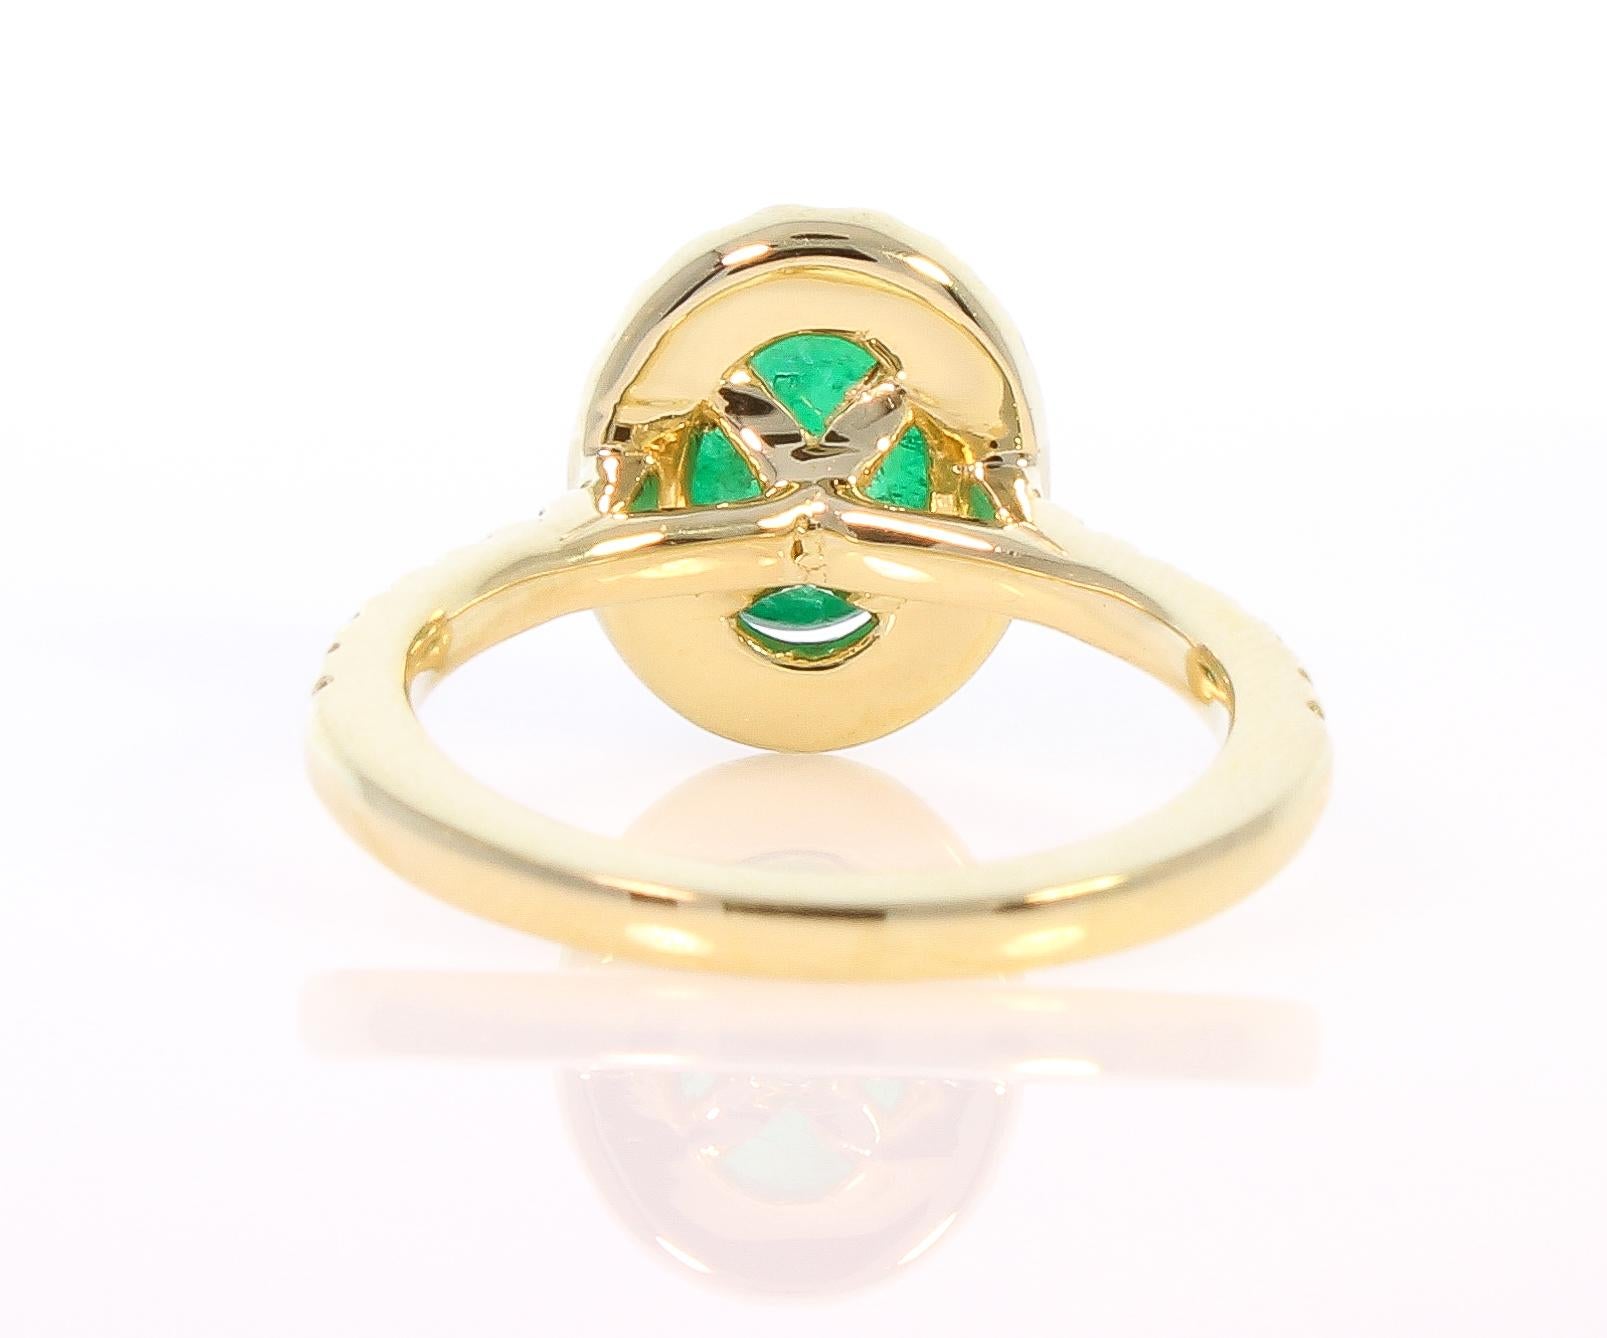 2.31 Carat Cabochon Emerald and Diamond Cocktail Ring in 18 Karat Yellow Gold 2